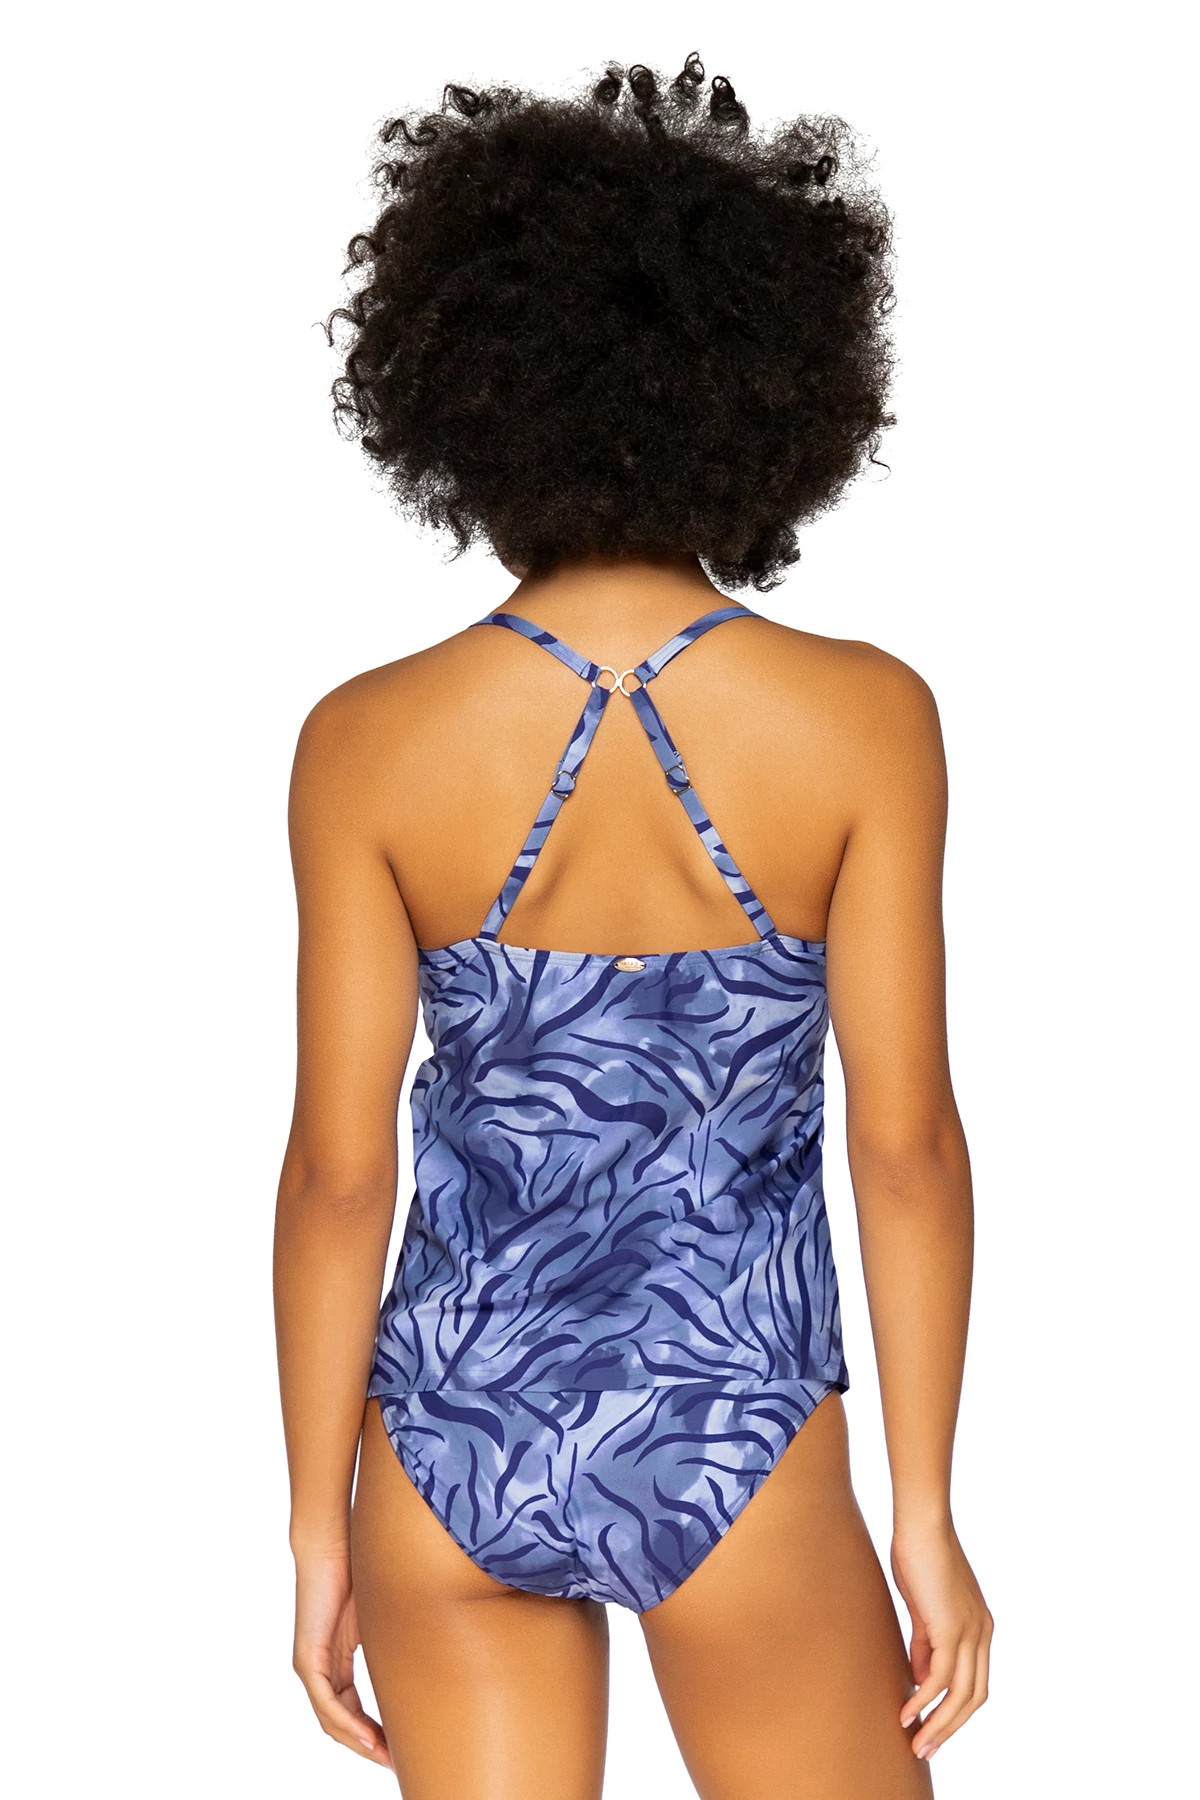 SUMATRA Crossroads Over The Shoulder Tankini Top (D+ Cup) image number 2